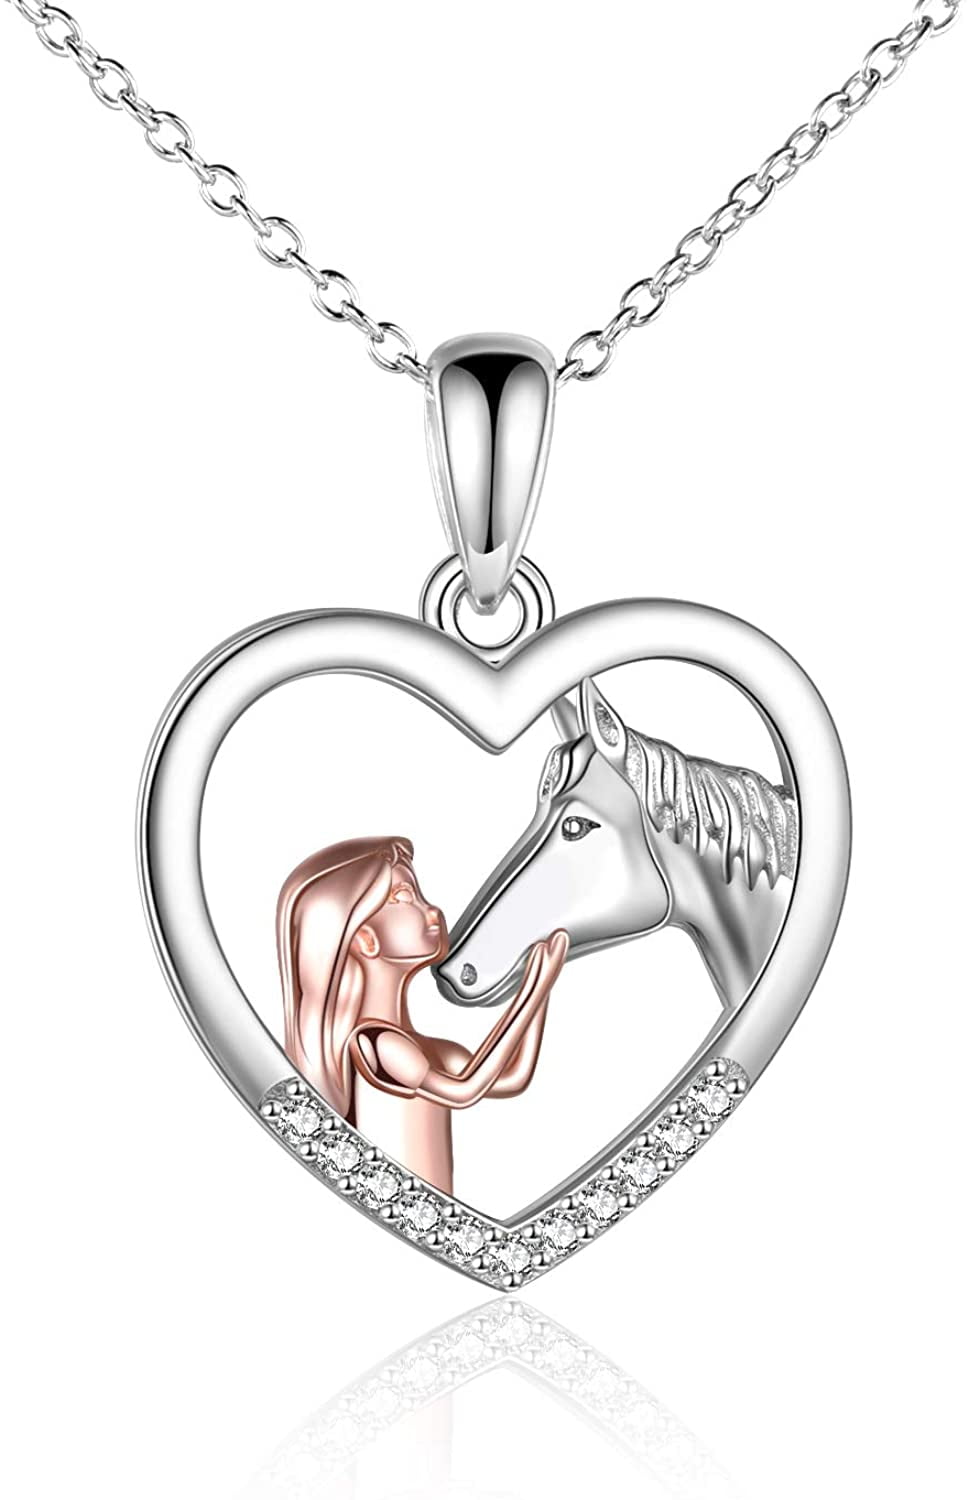 HORSE & WESTERN JEWELLERY JEWELRY 925 STERLING SILVER LADIES OPEN HORSE NECKLACE 